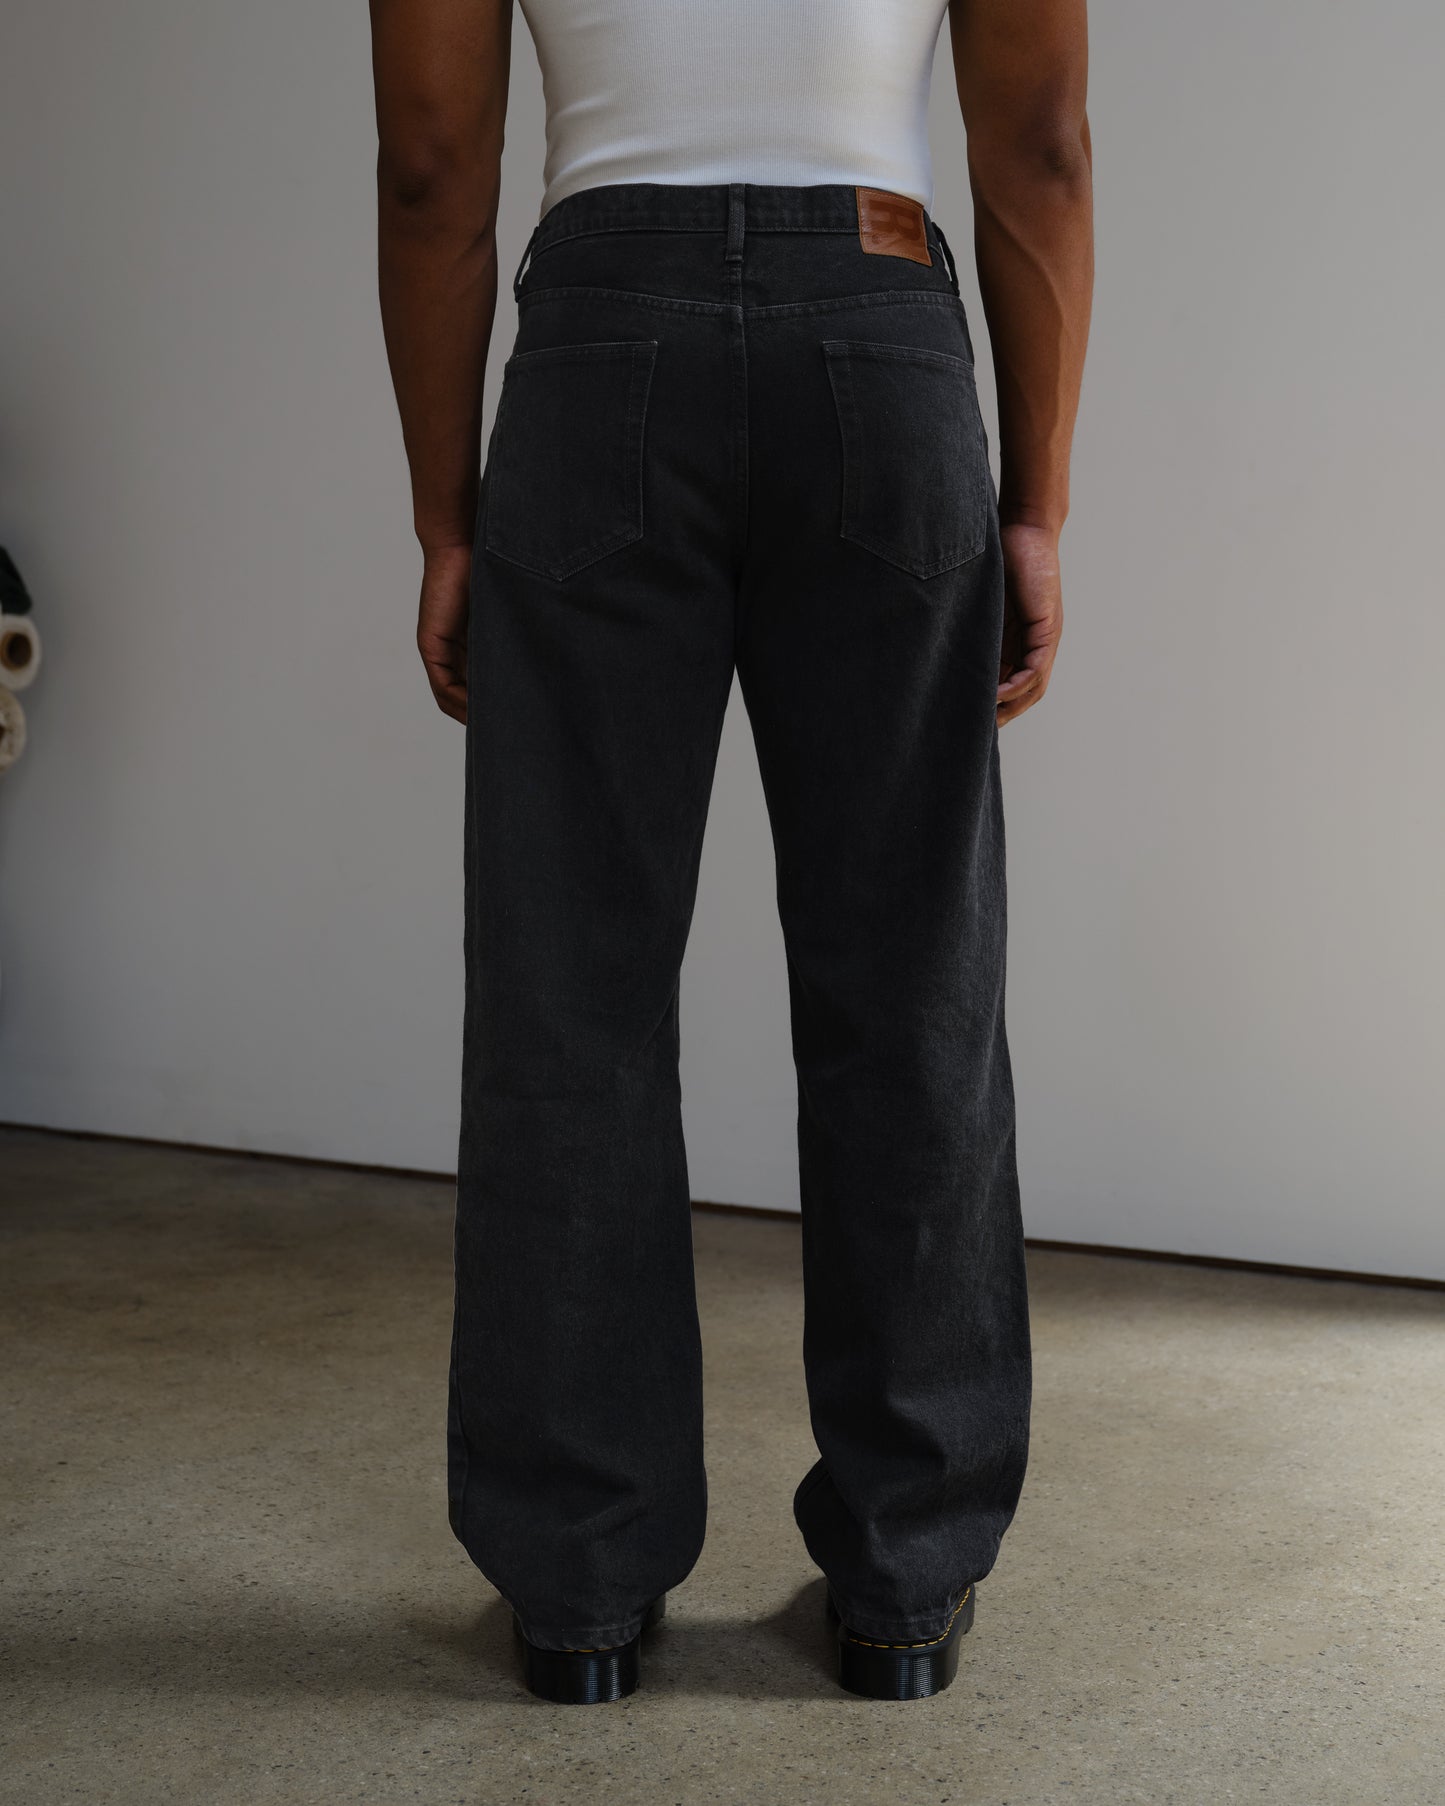 RD202-R / RELAXED FIT DENIM JEANS, WASHED BLACK